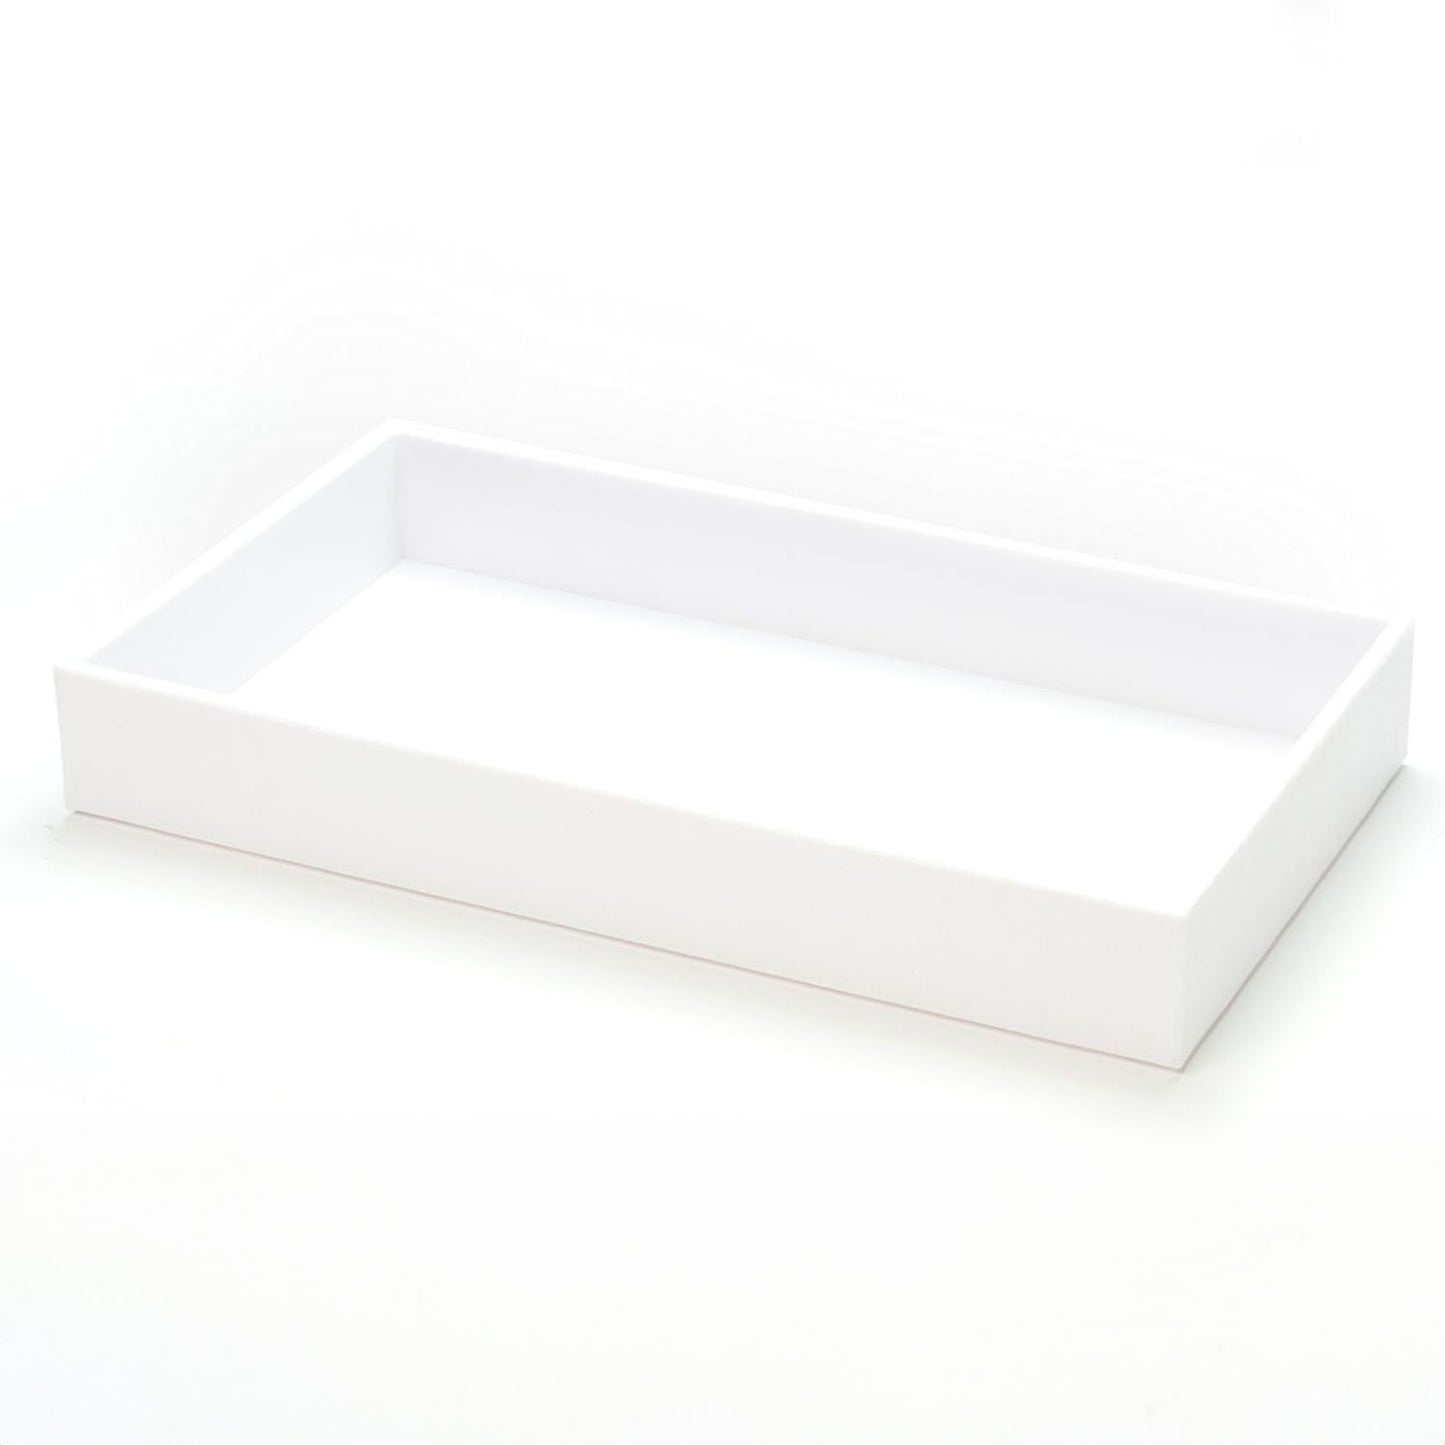 2" High Standard Size White Stackable Plastic Tray